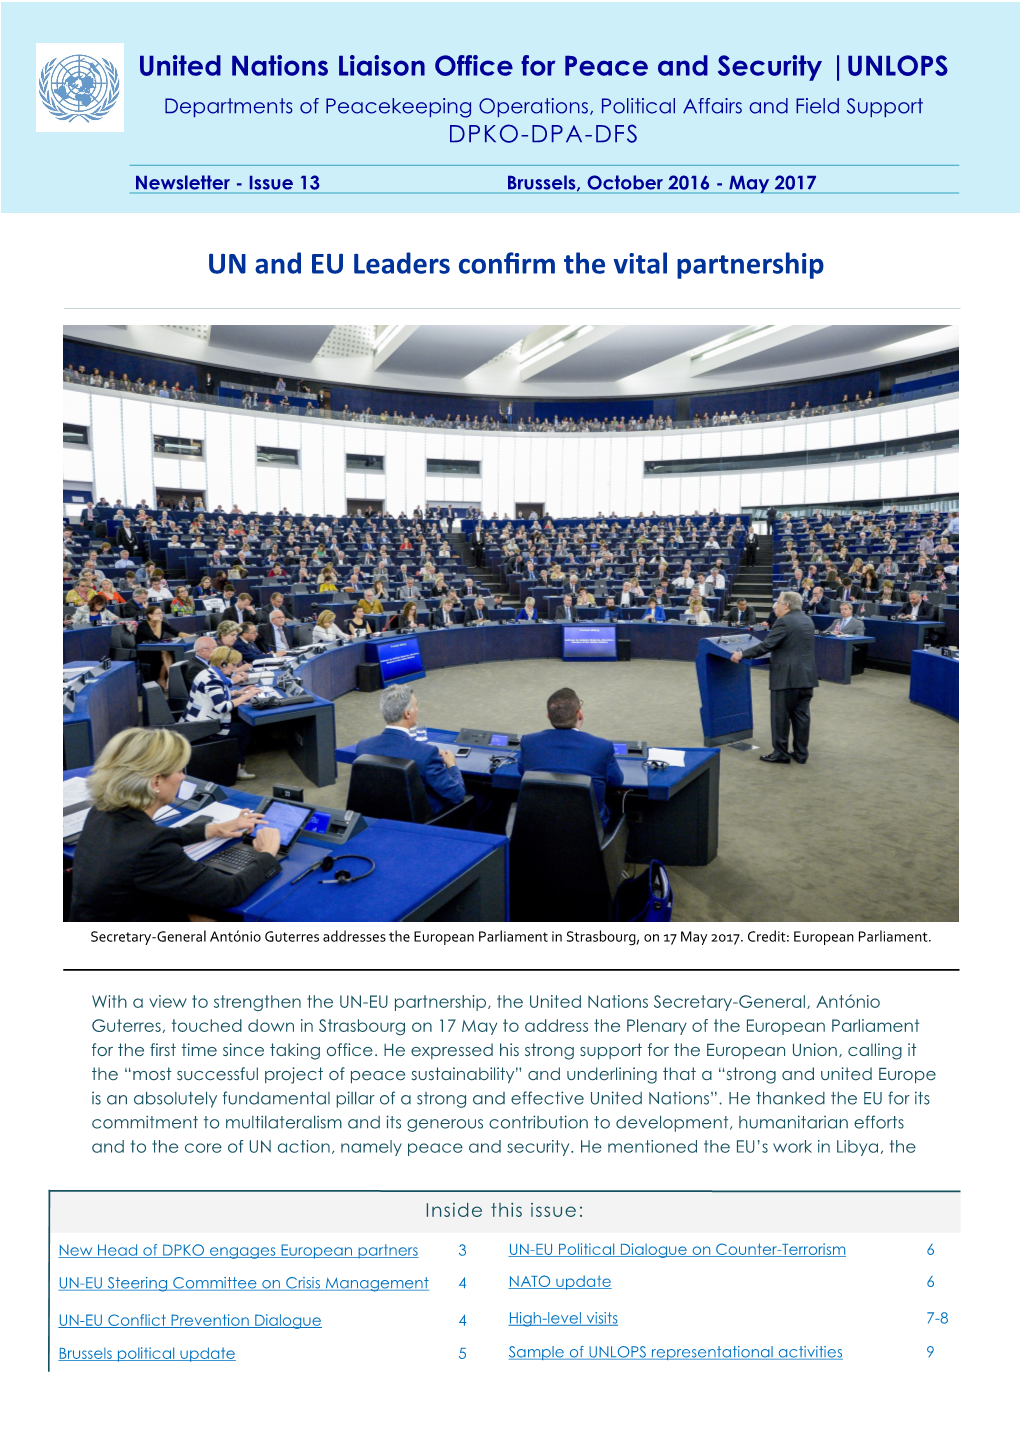 United Nations Liaison Office for Peace and Security |UNLOPS Departments of Peacekeeping Operations, Political Affairs and Field Support DPKO-DPA-DFS